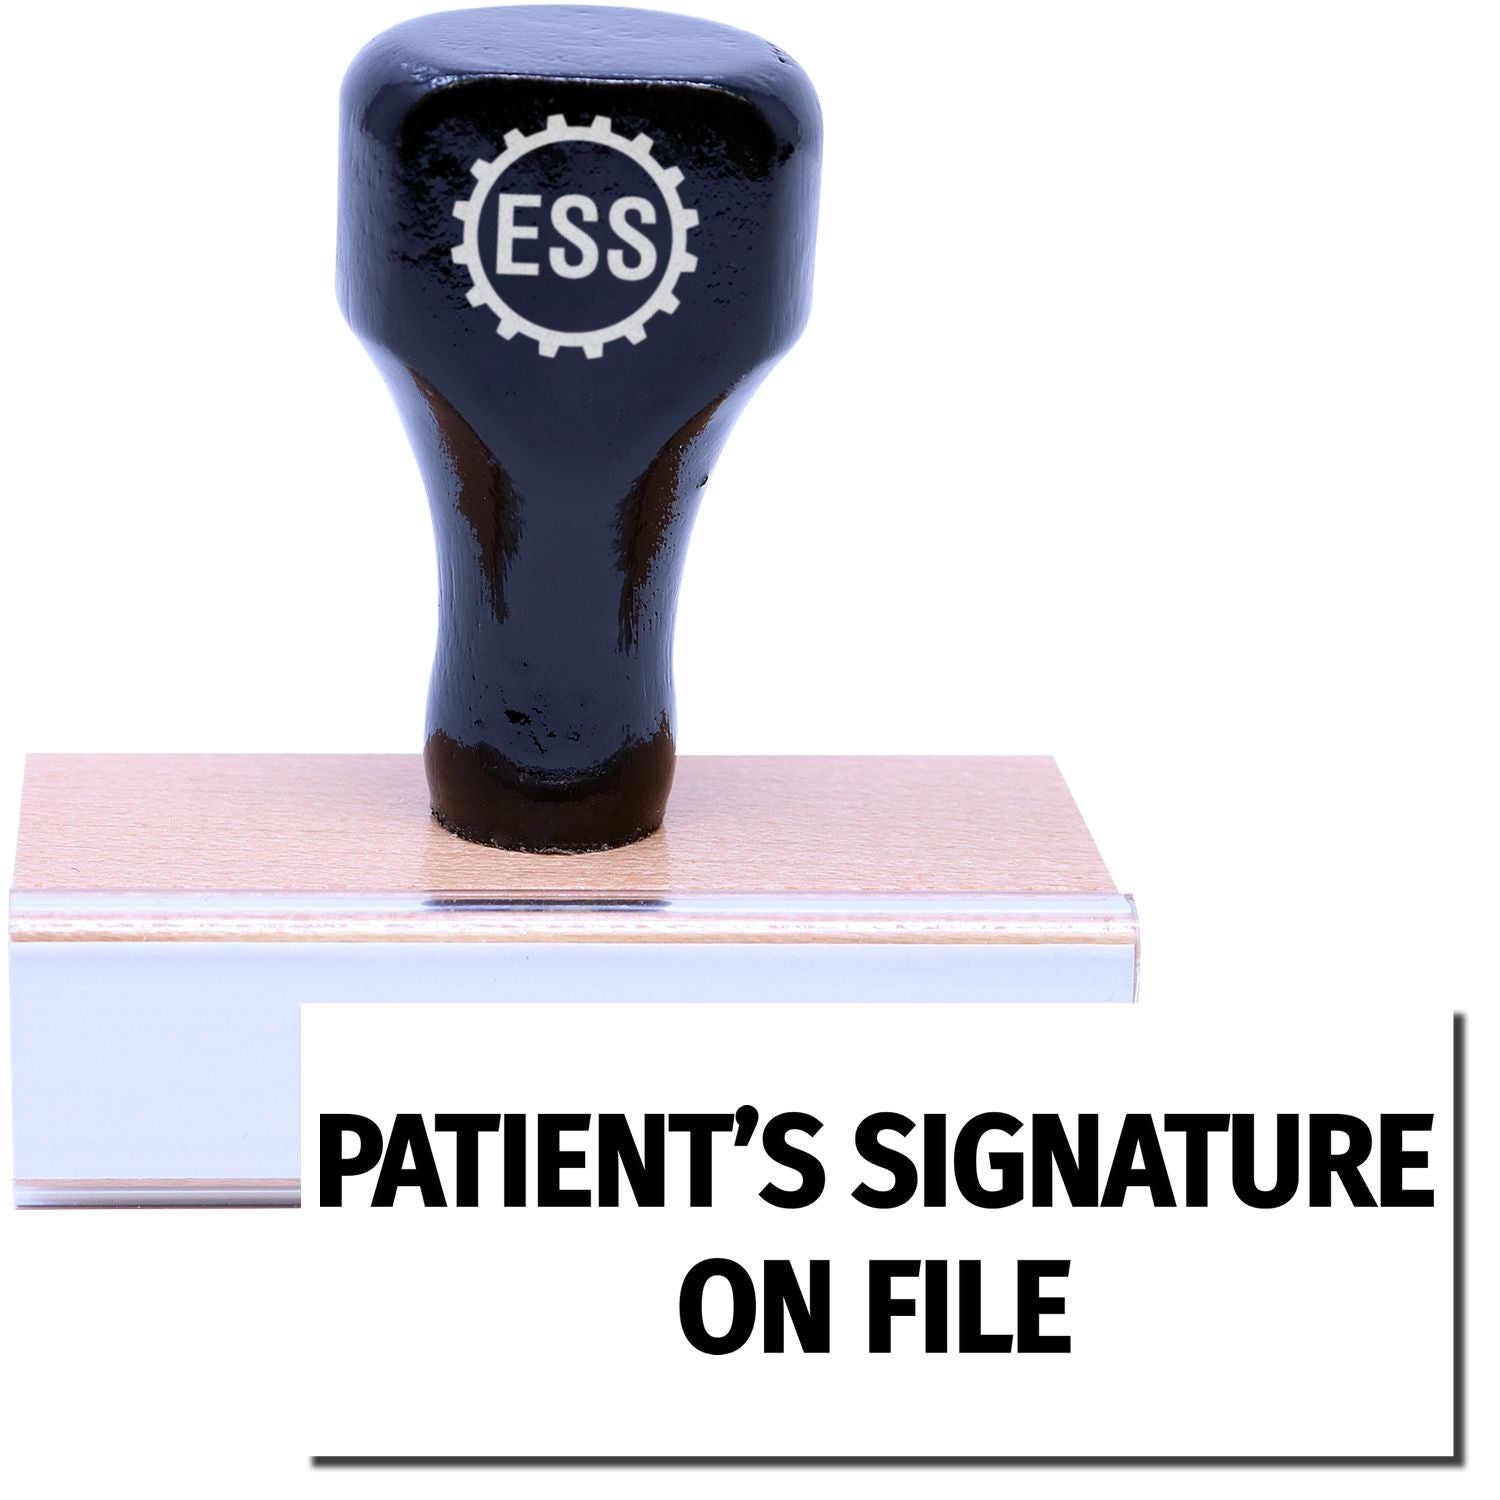 A stock office rubber stamp with a stamped image showing how the text "PATIENT'S SIGNATURE ON FILE" is displayed after stamping.